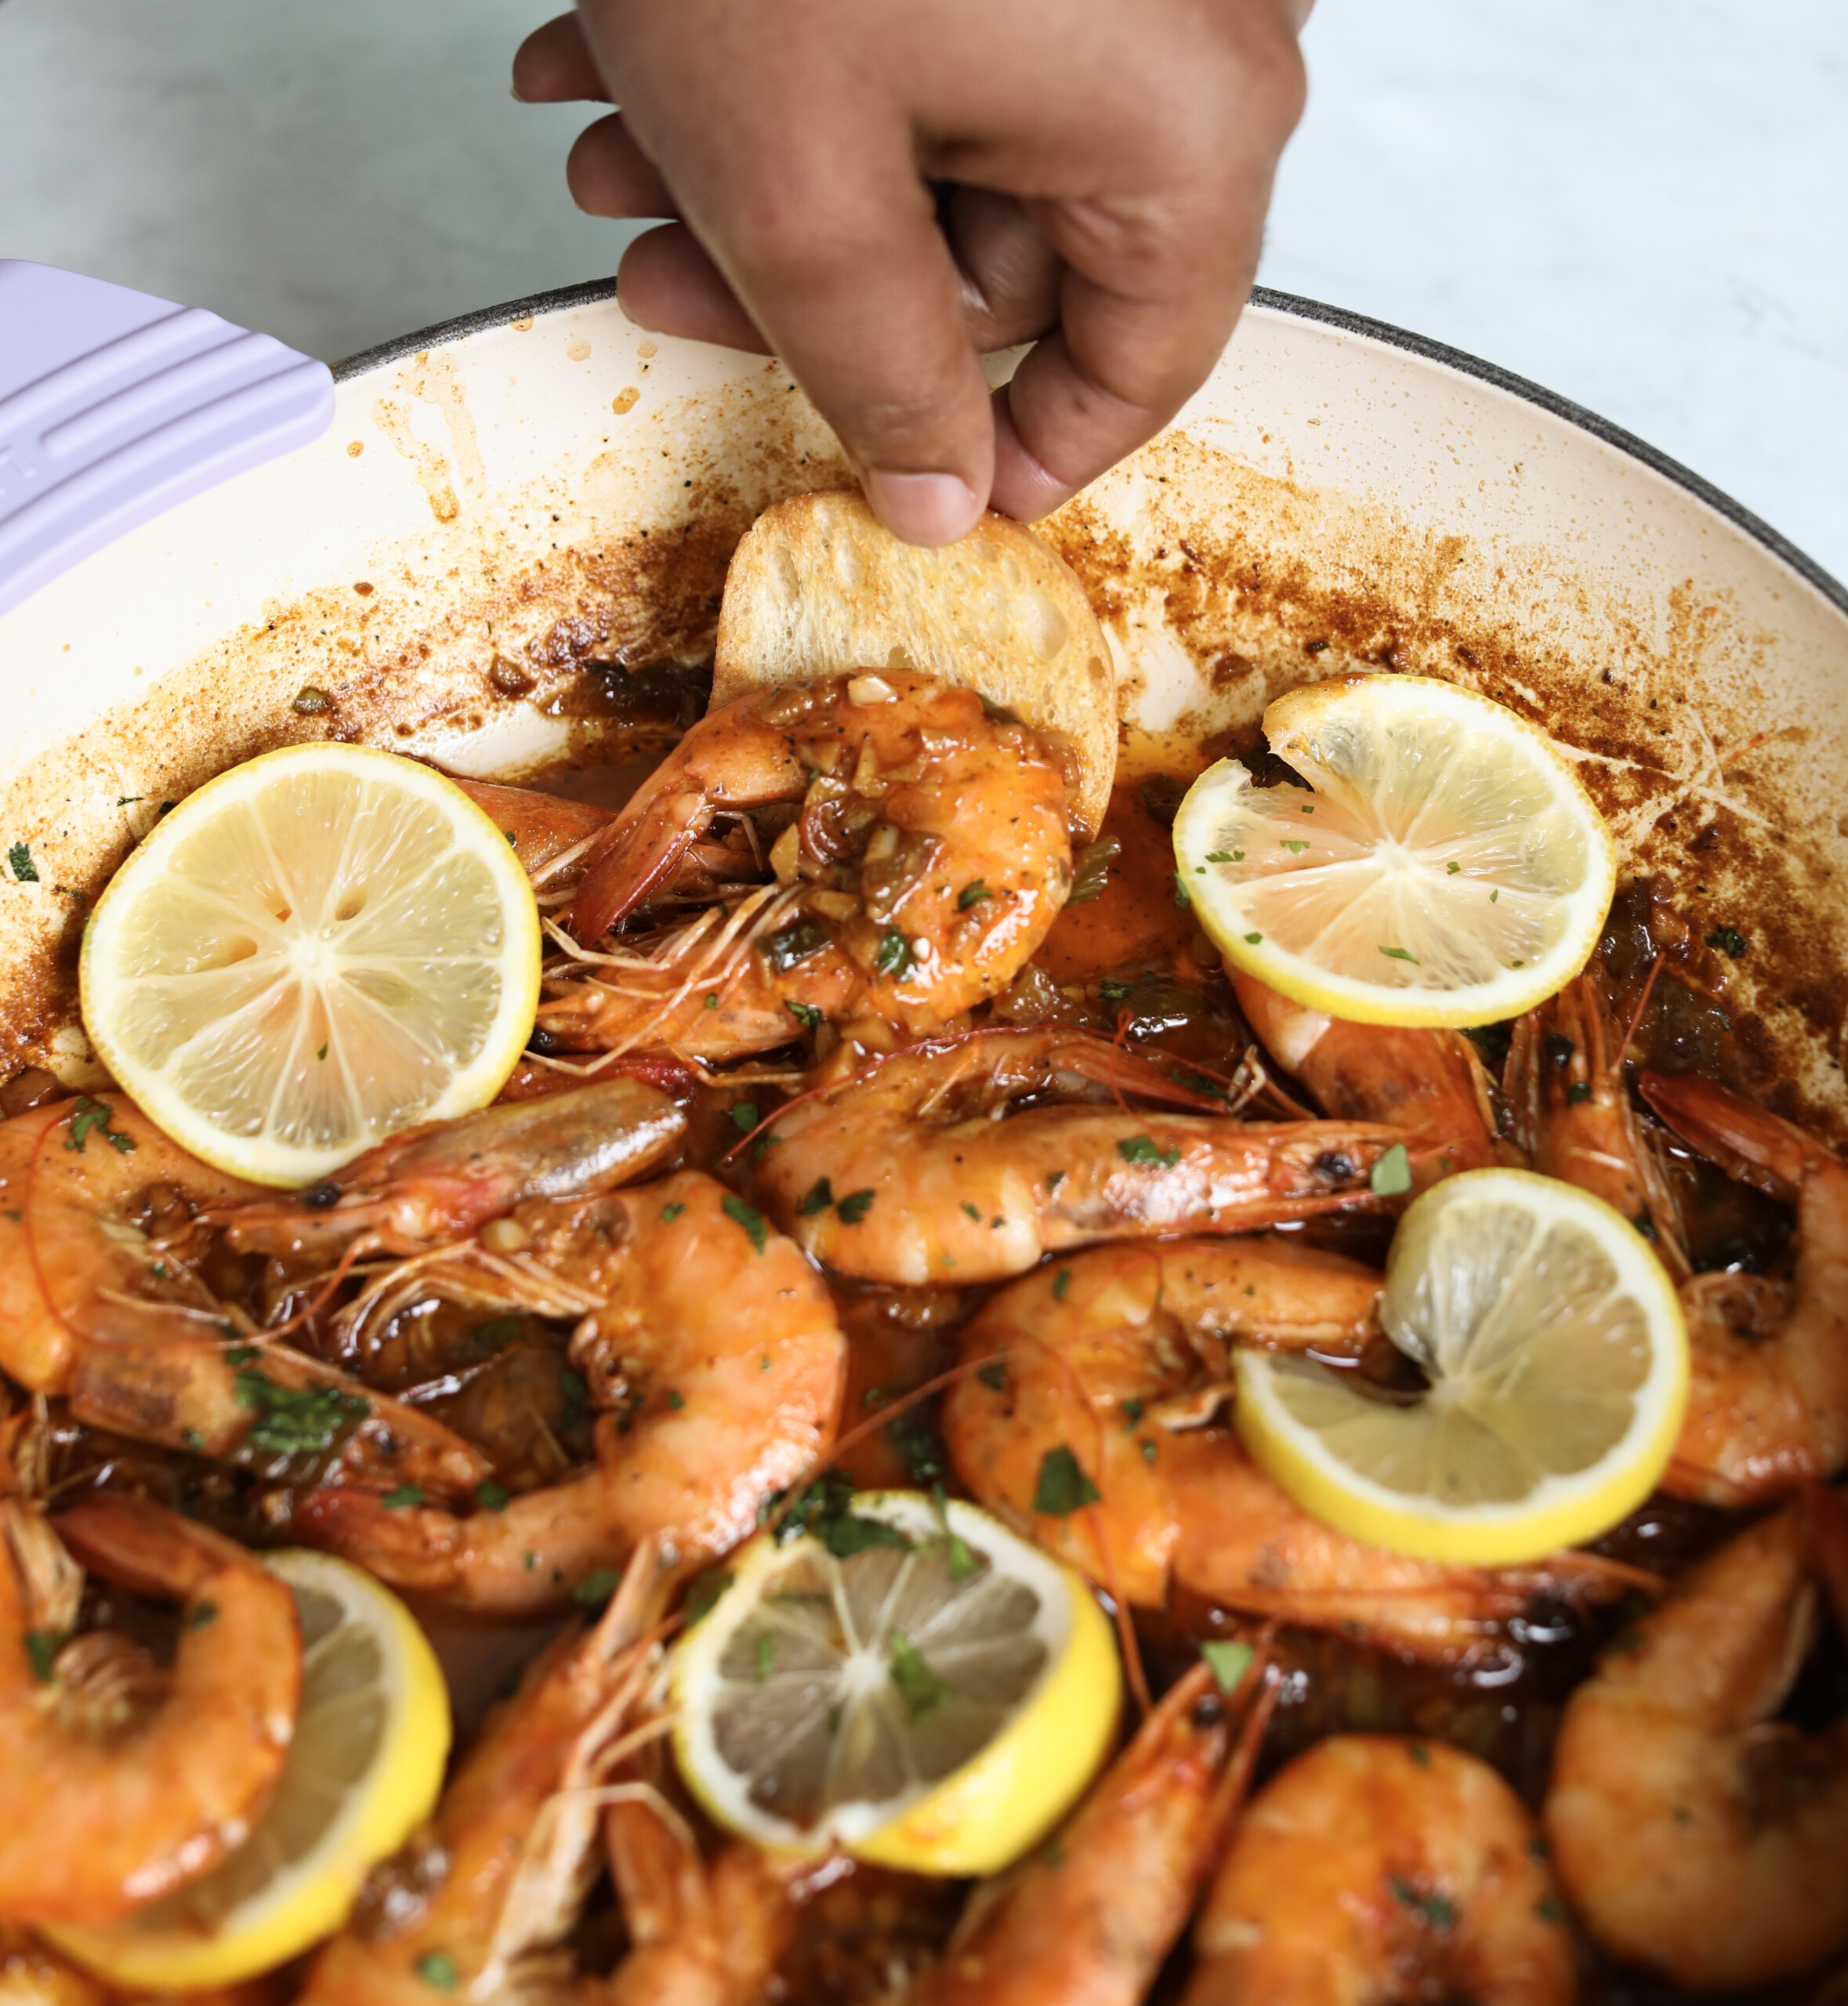 a hand dipping a piece of bread into a pot containing New Orleans style bbq shrimp